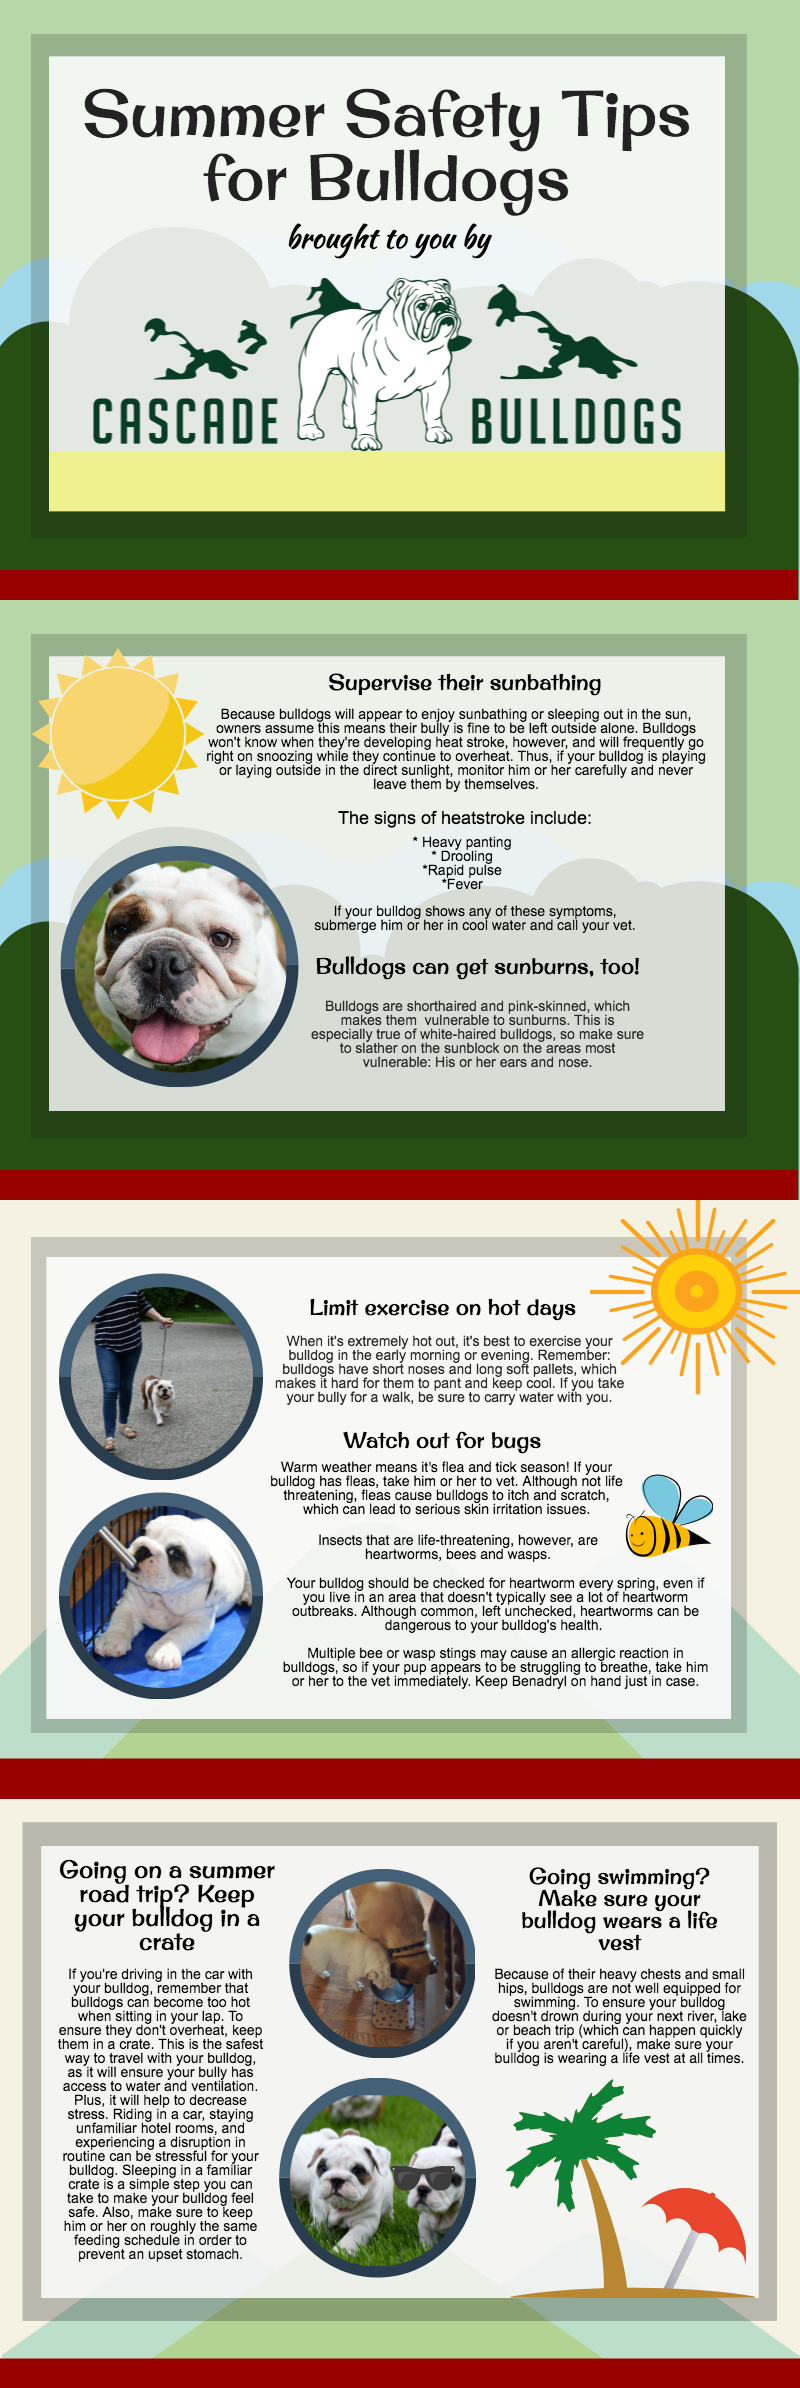 Tips for caring for your bulldog in the summer